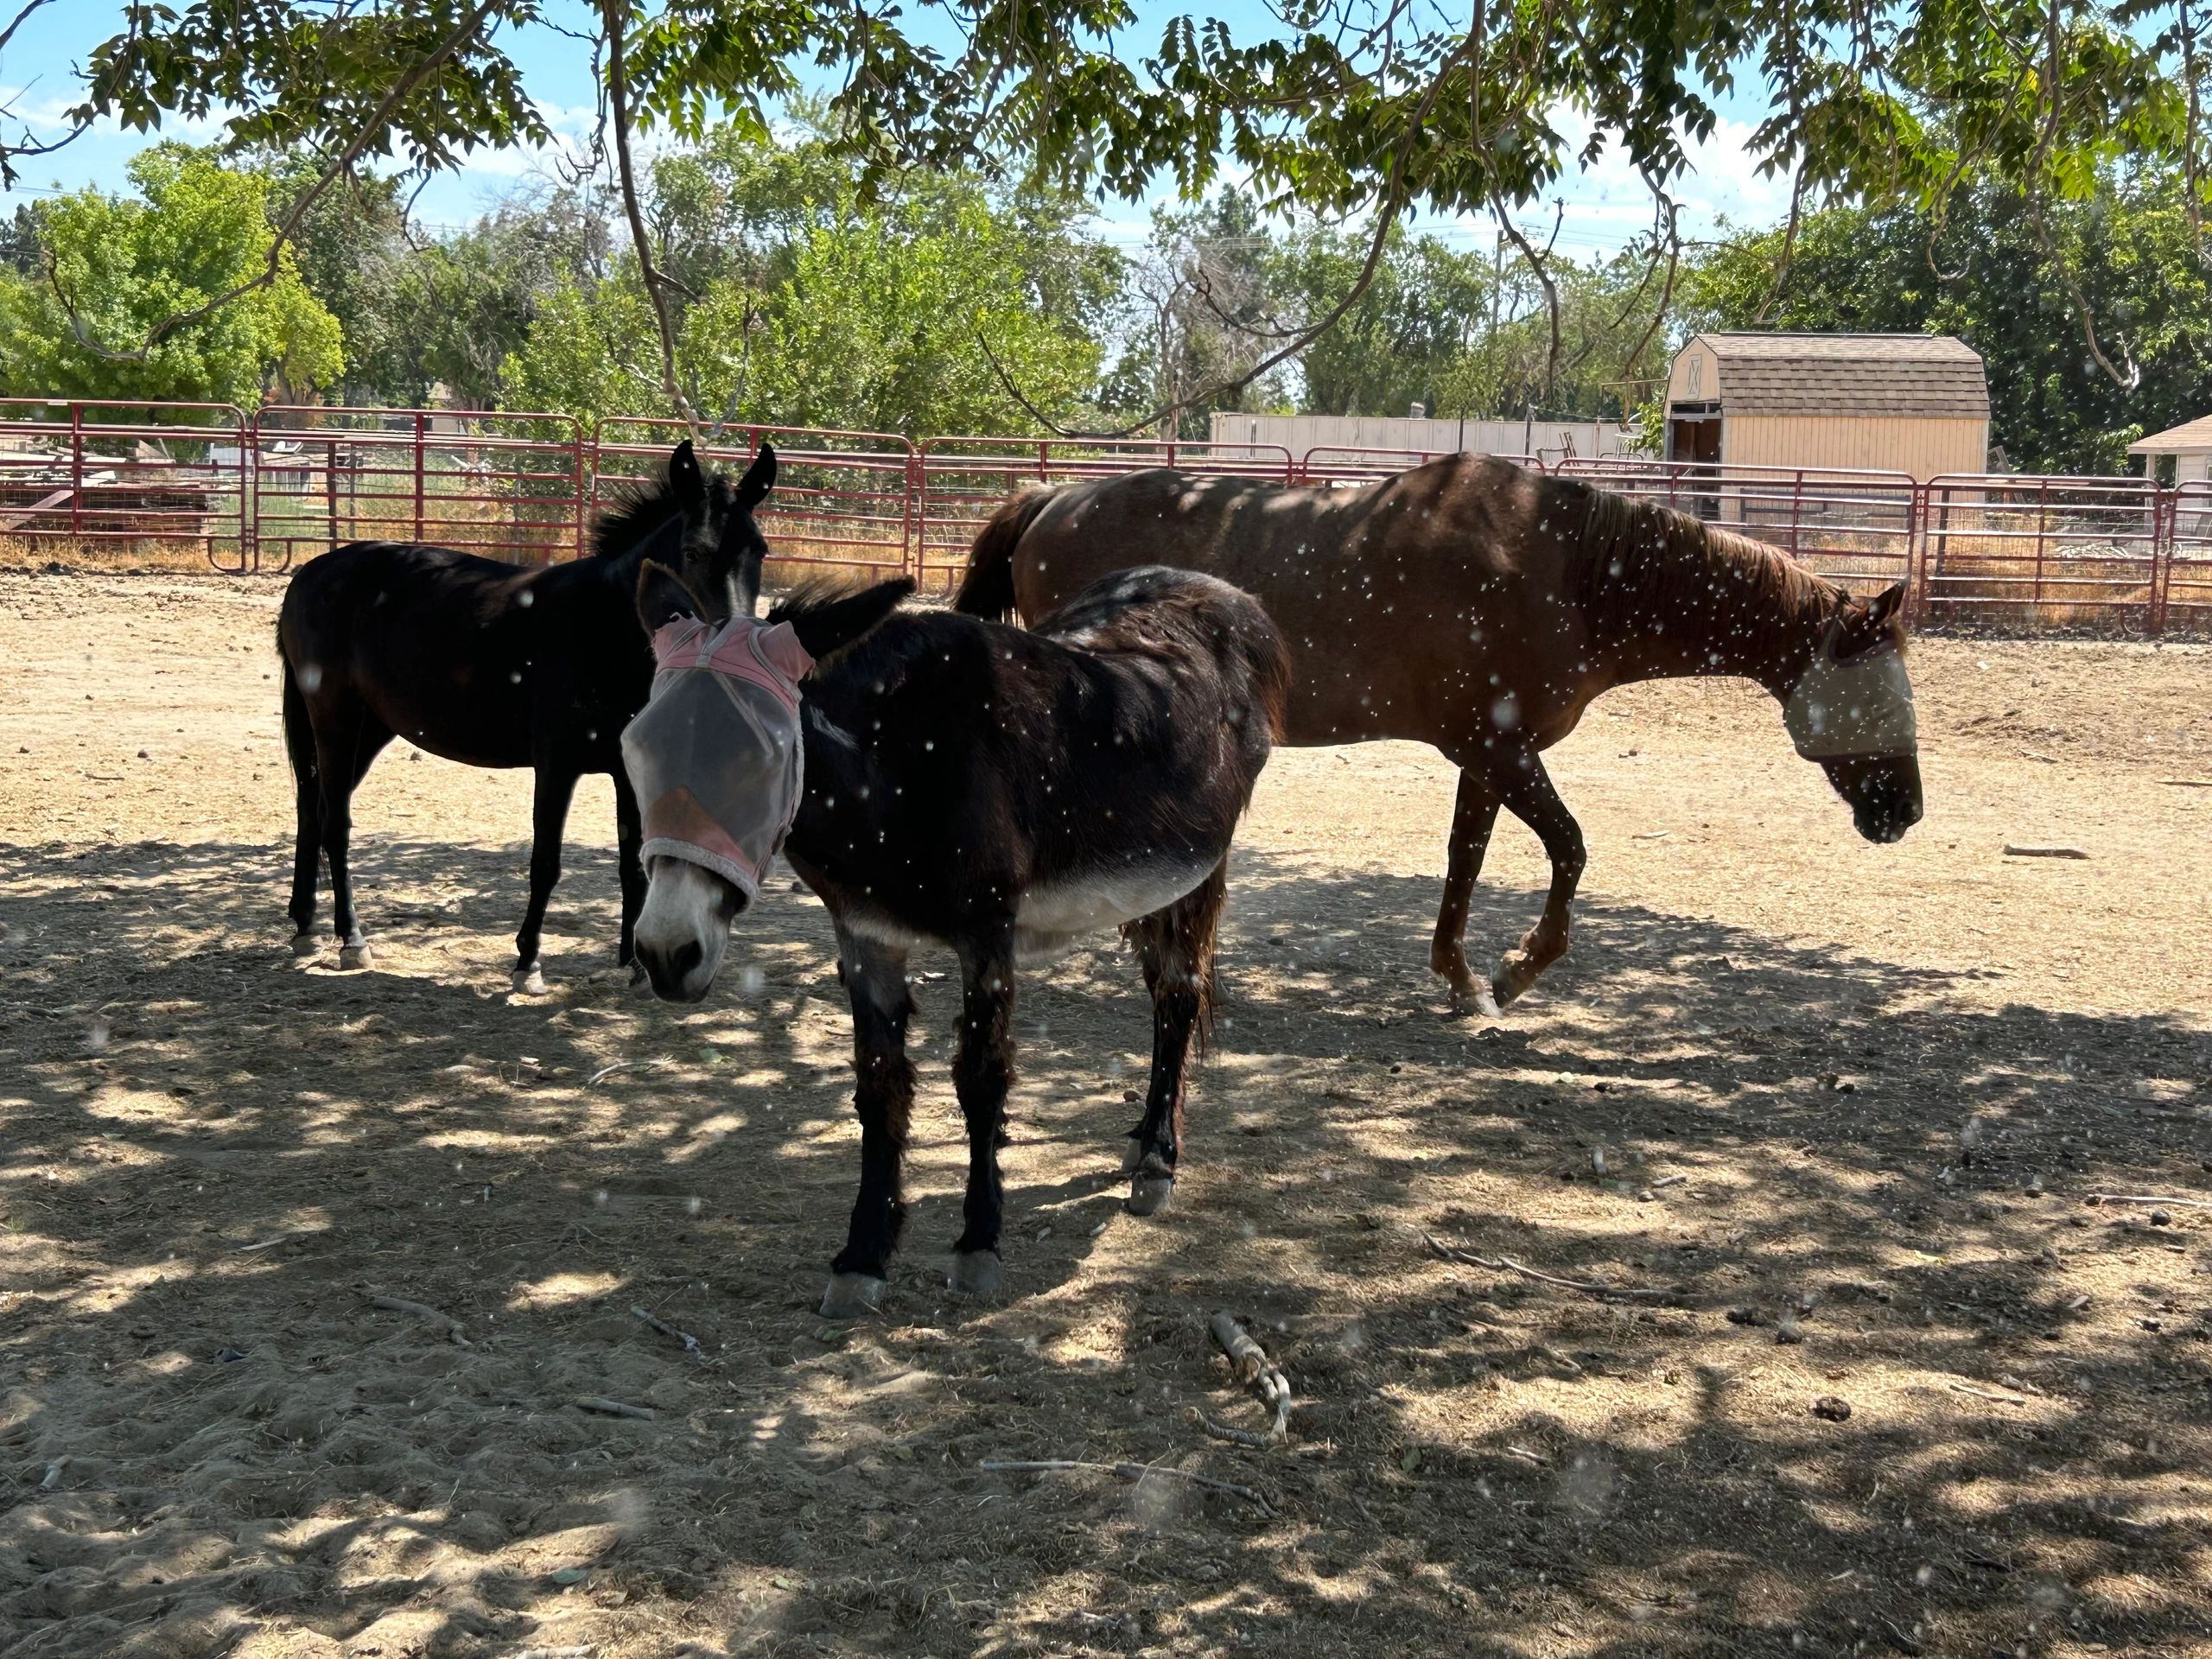 Rescued Equine enjoy shade on a hot day at
CARE Sanctuary